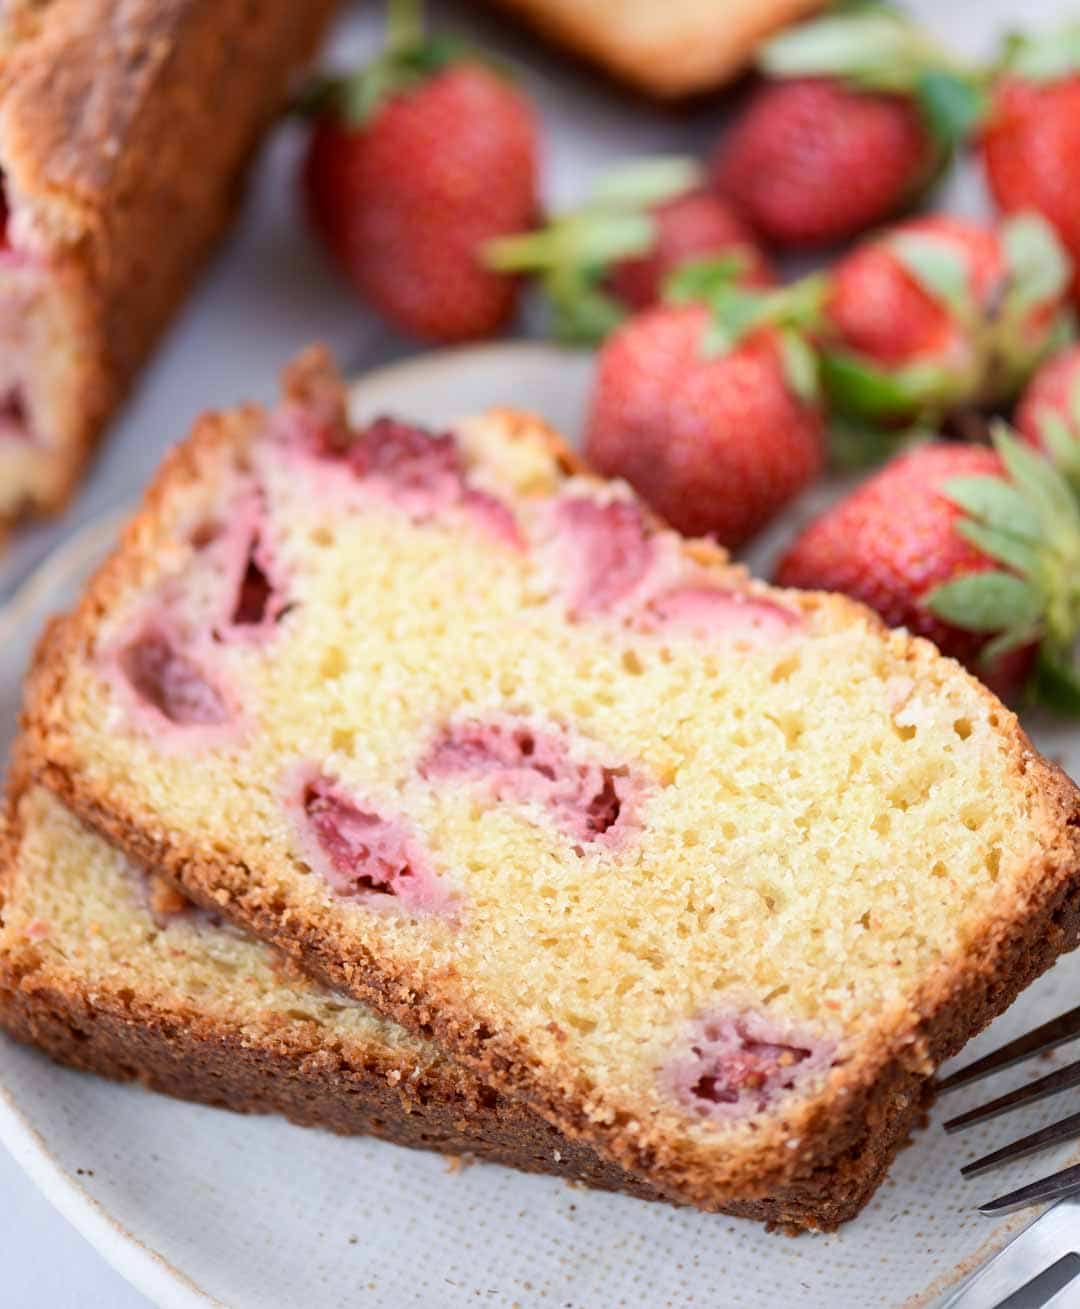 Strawberry Cake with loads of fresh strawberries is made from scratch with basic pantry staples. You will get to taste strawberry in every bite of this buttery, moist and delicious cake.